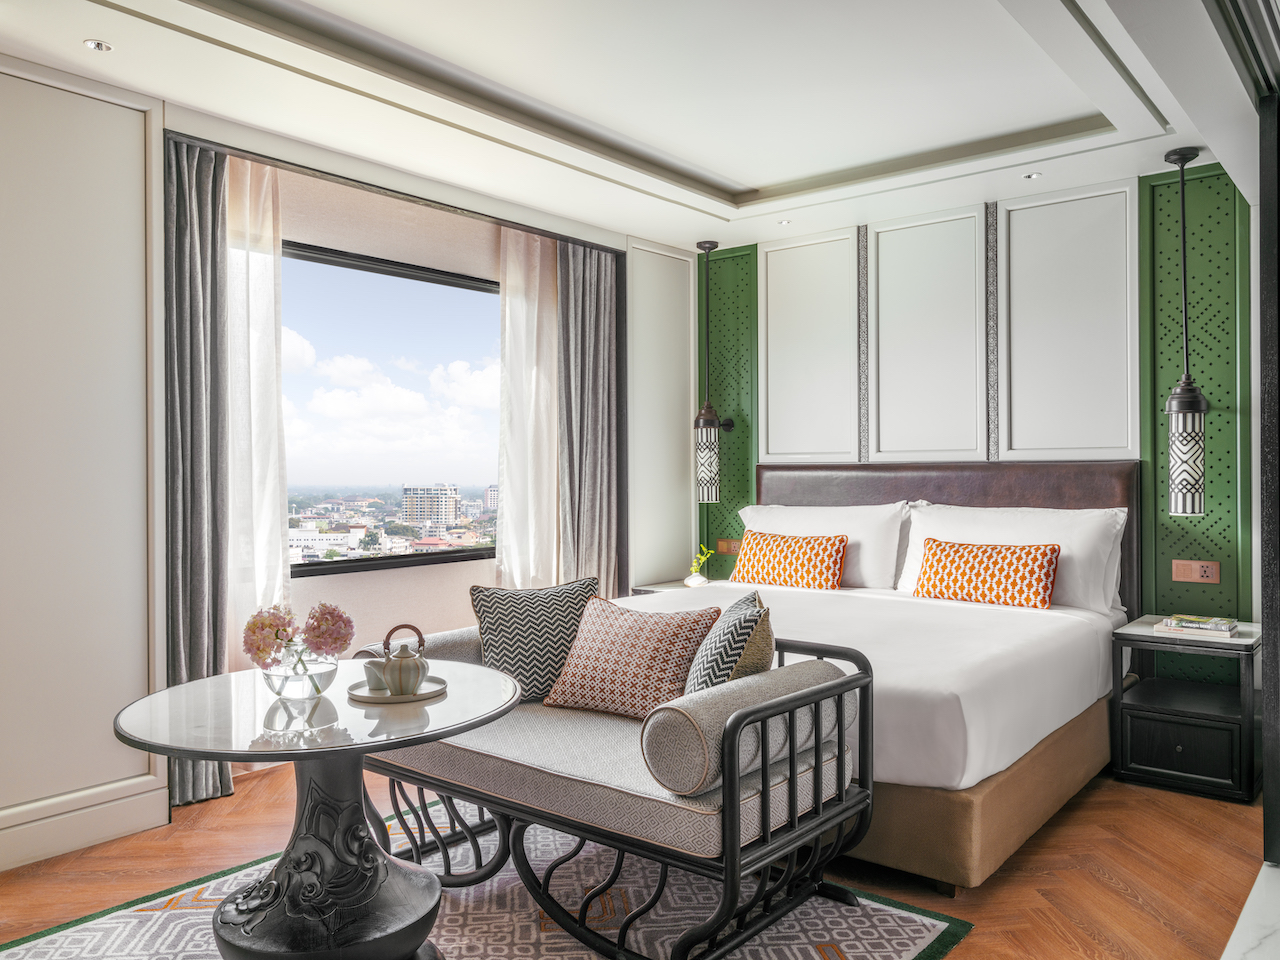 The InterContinental Chiang Mai The Mae Ping, located in the city's historic district, has opened its doors in one of northern Thailand’s most vibrant destinations.